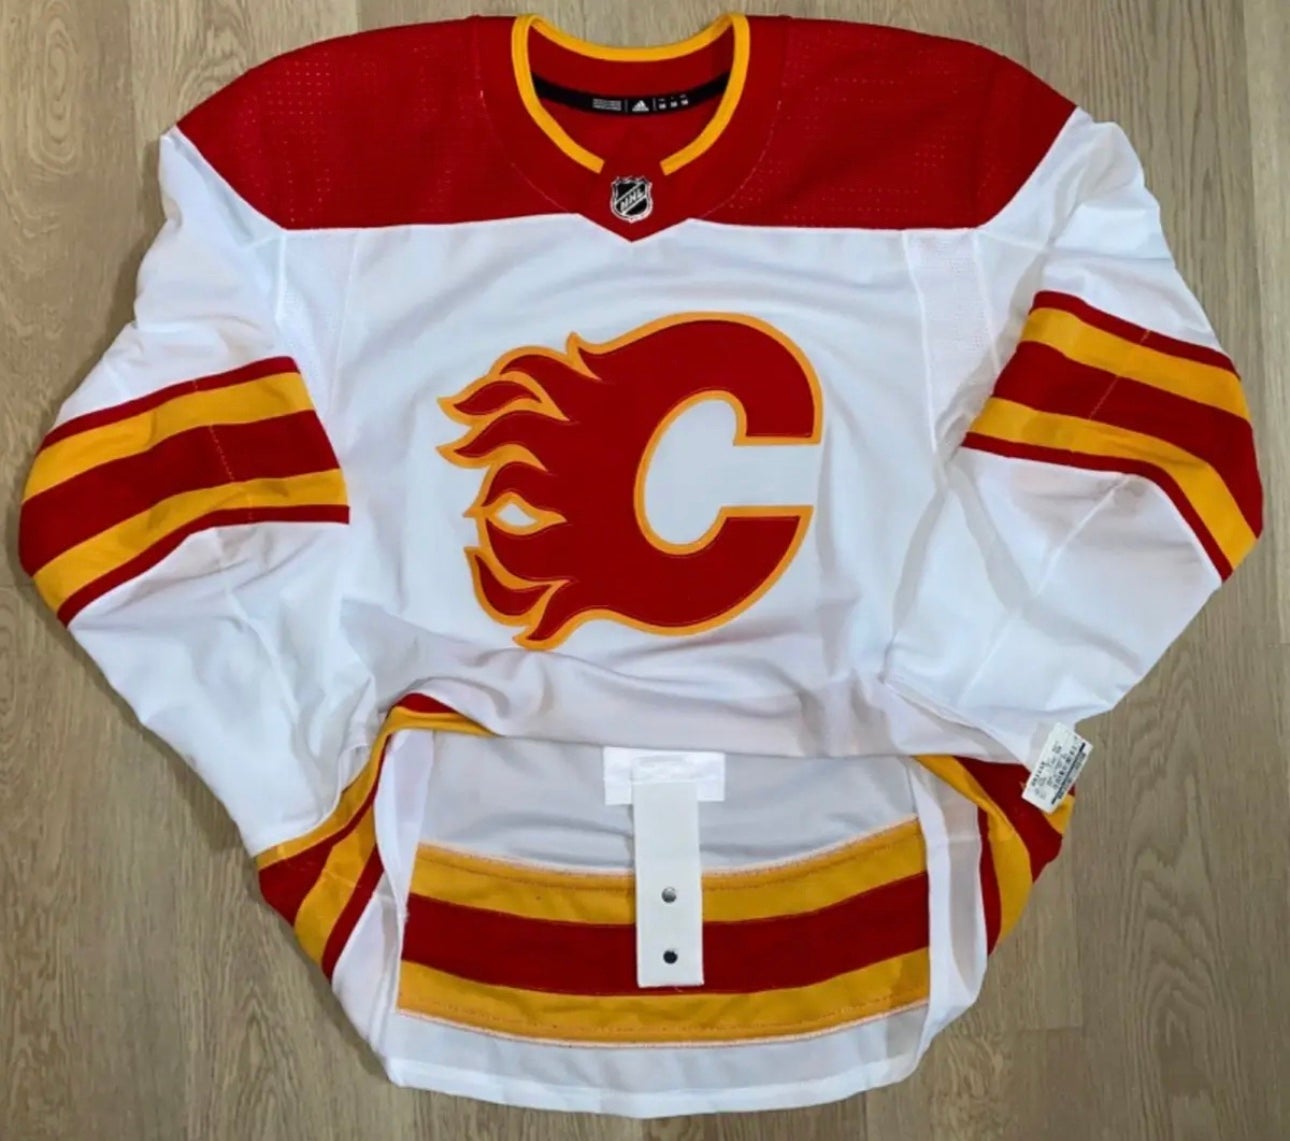 Adidas Calgary flames practice jersey Red